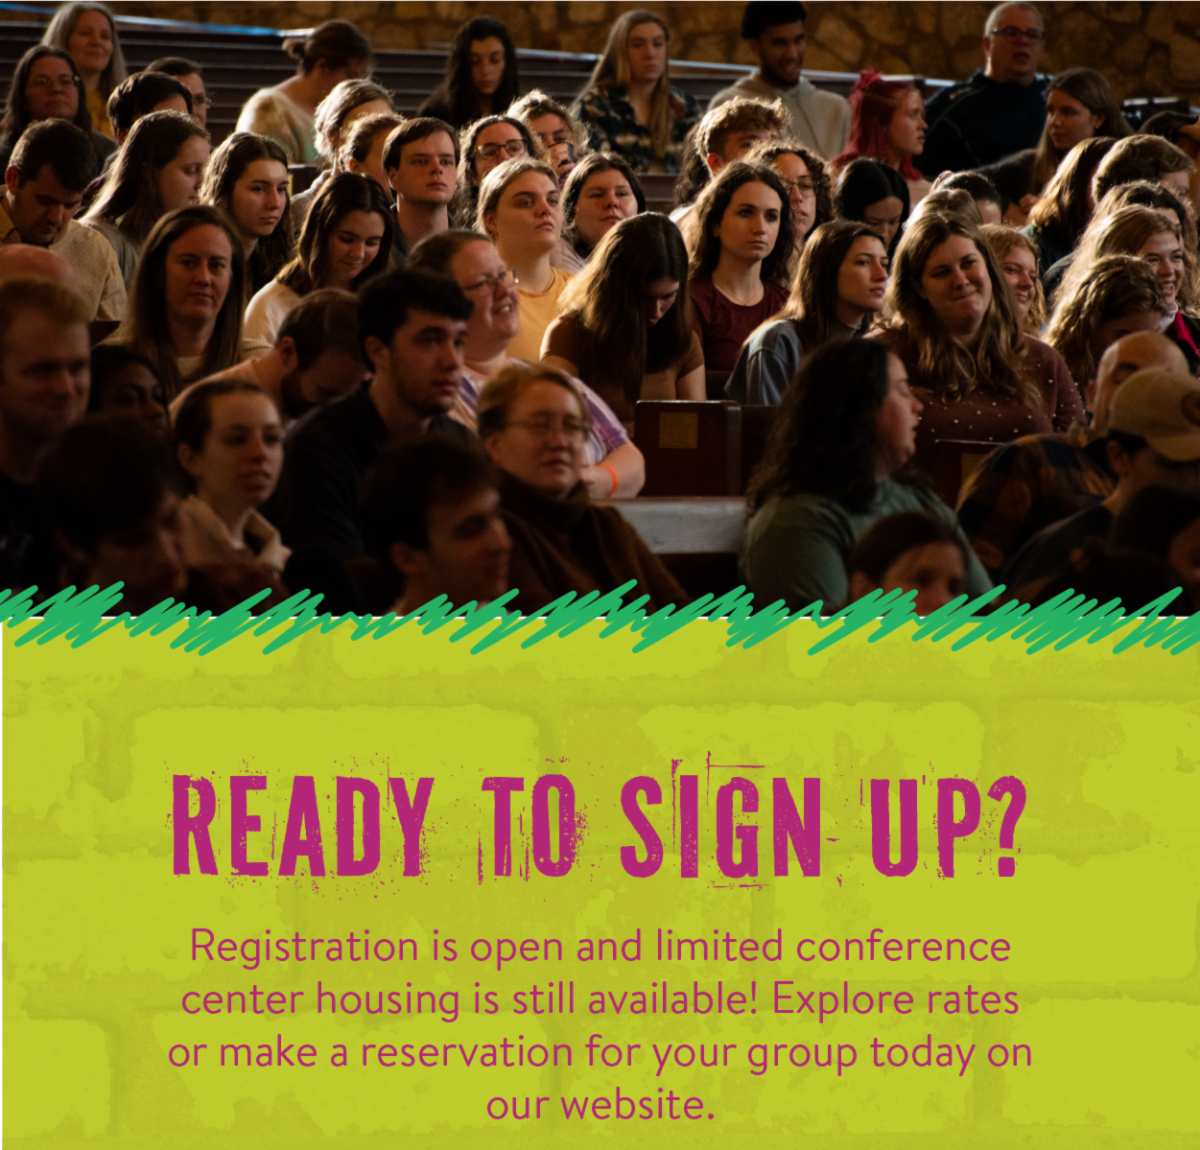 Ready to sign up? - Registration is open and limited conference center housing is still available! Explore rates or make a reservation for your group today on our website.